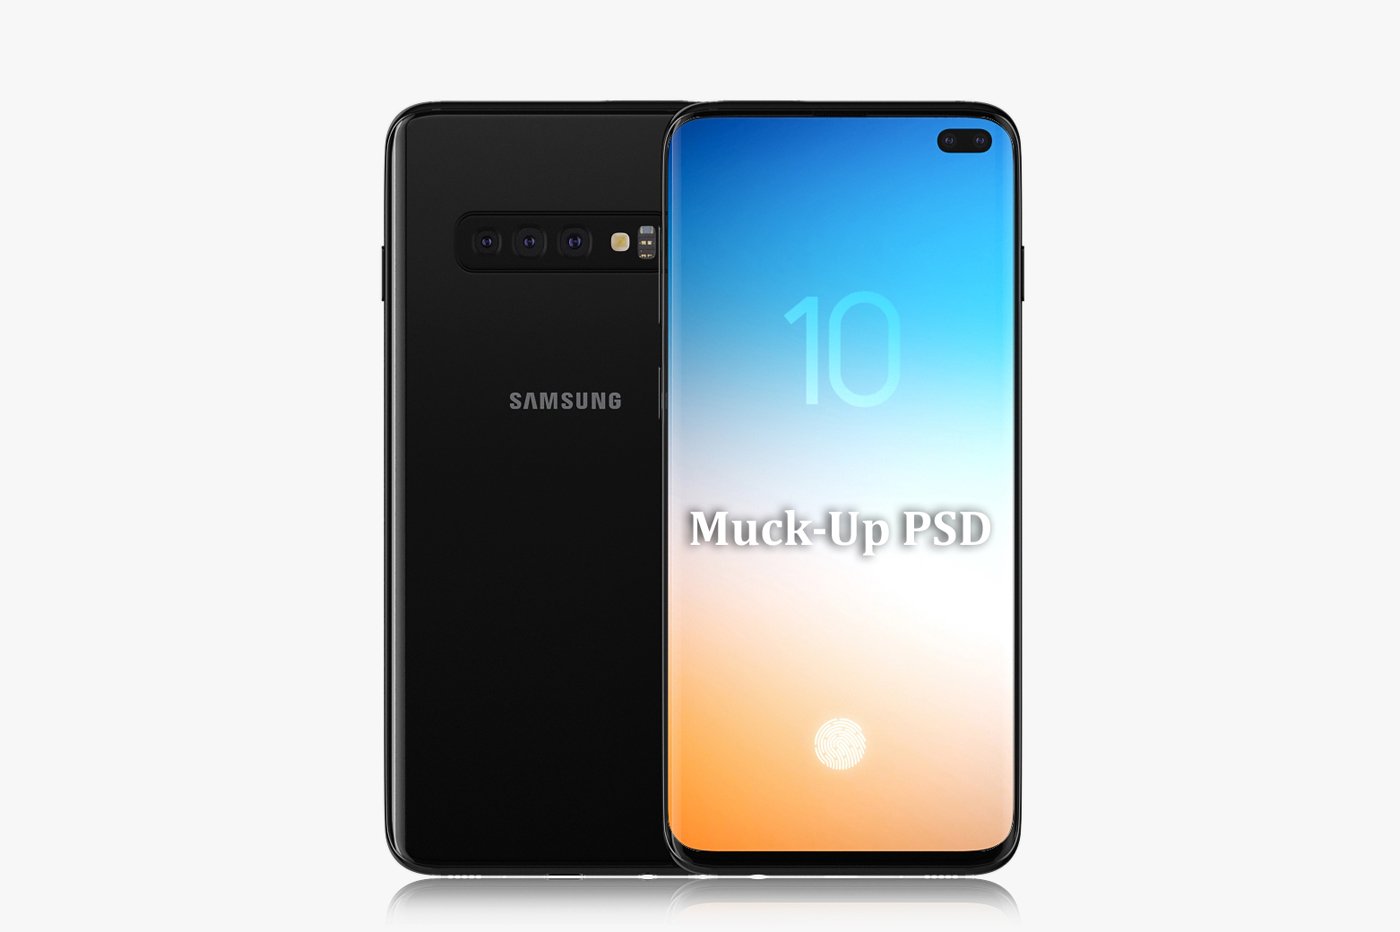 Samsung galaxy S10 Plus mock-up preview image.